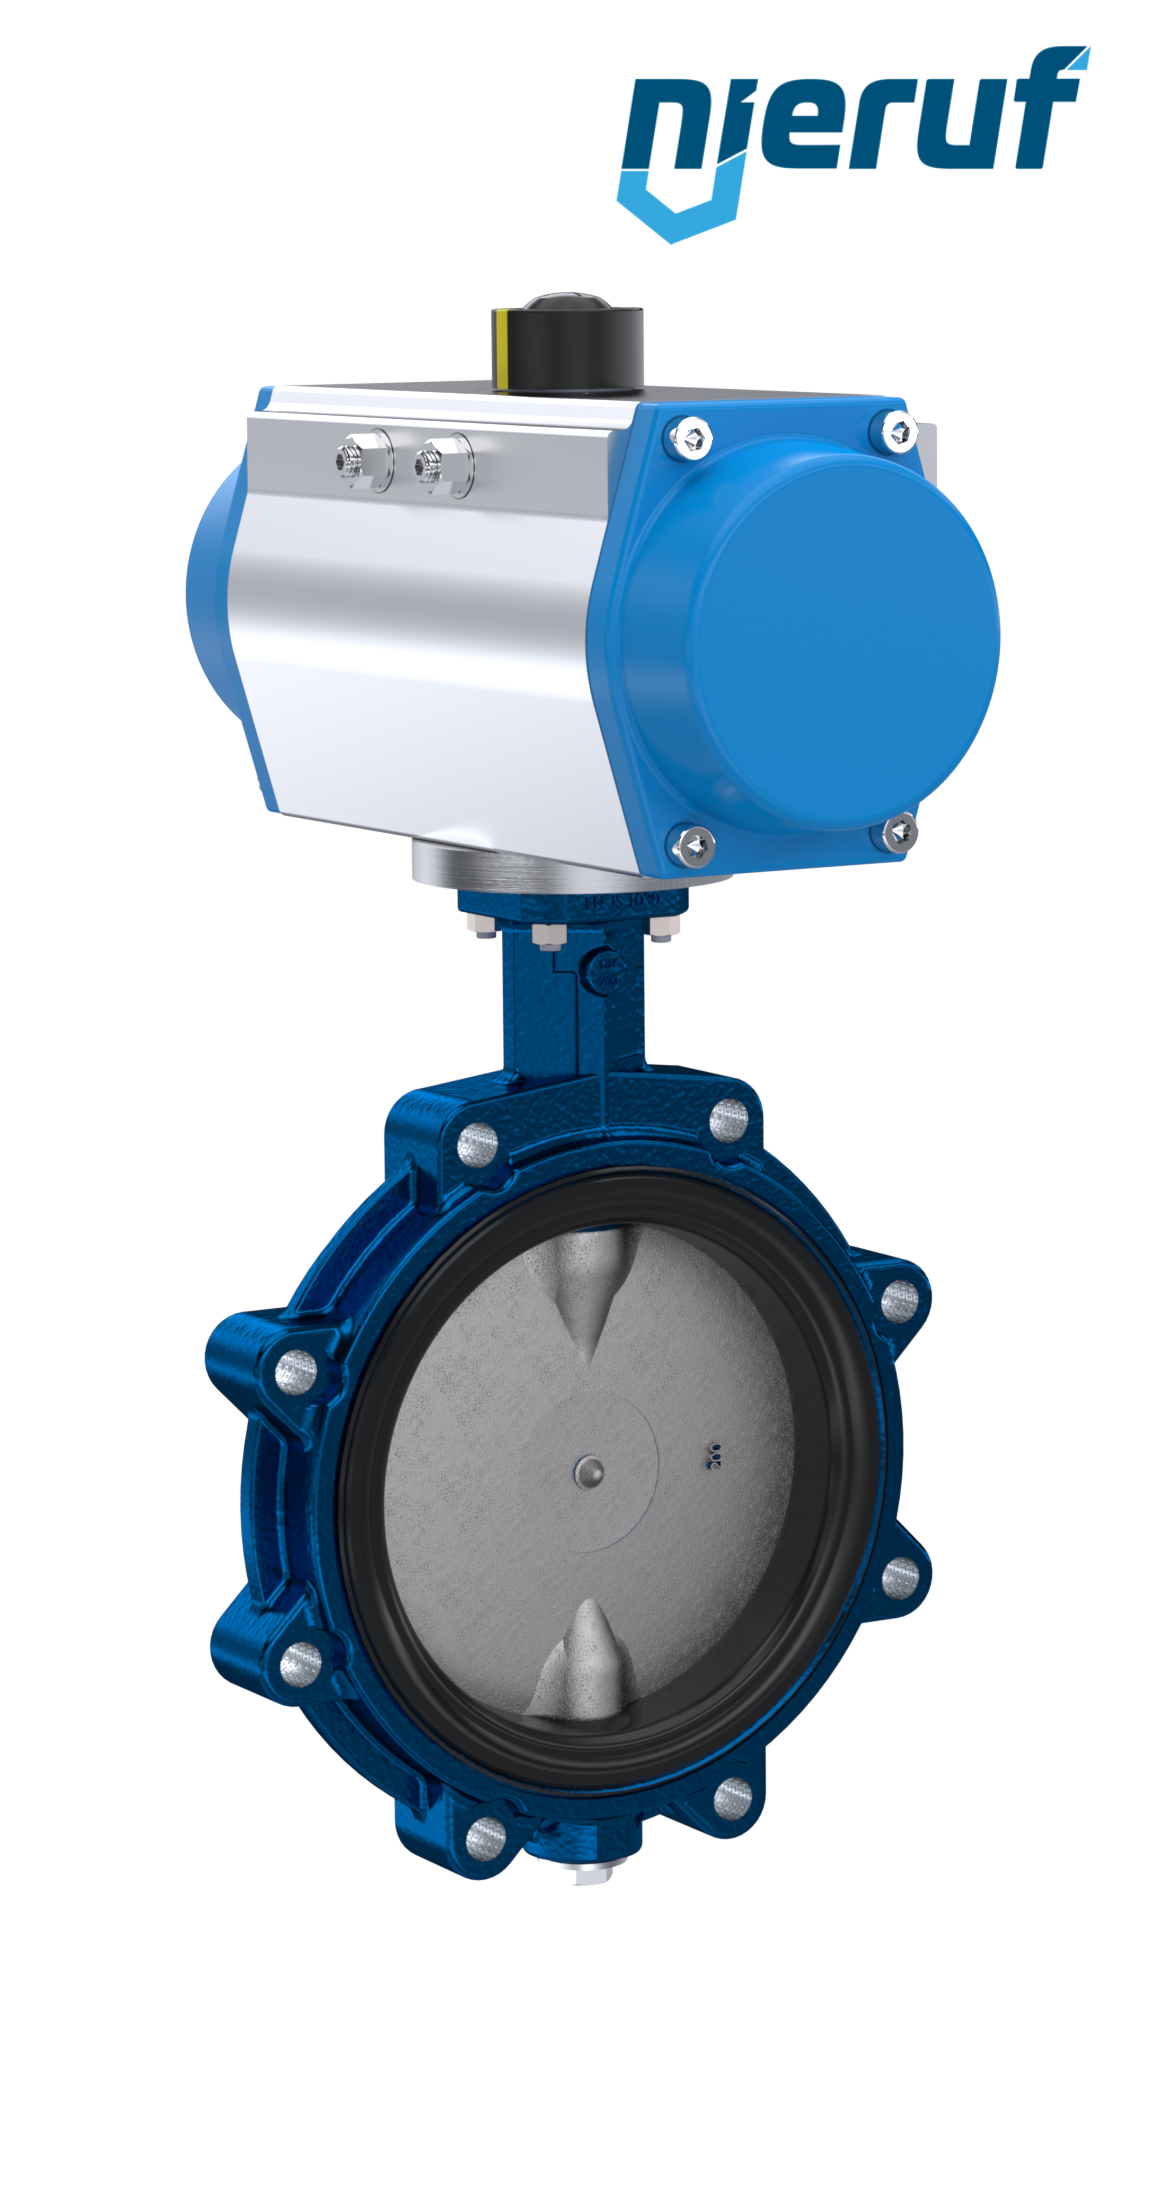 Butterfly valve DN 100 AK02 EPDM DVGW drinking water, WRAS, ACS, W270 pneumatic actuator single acting